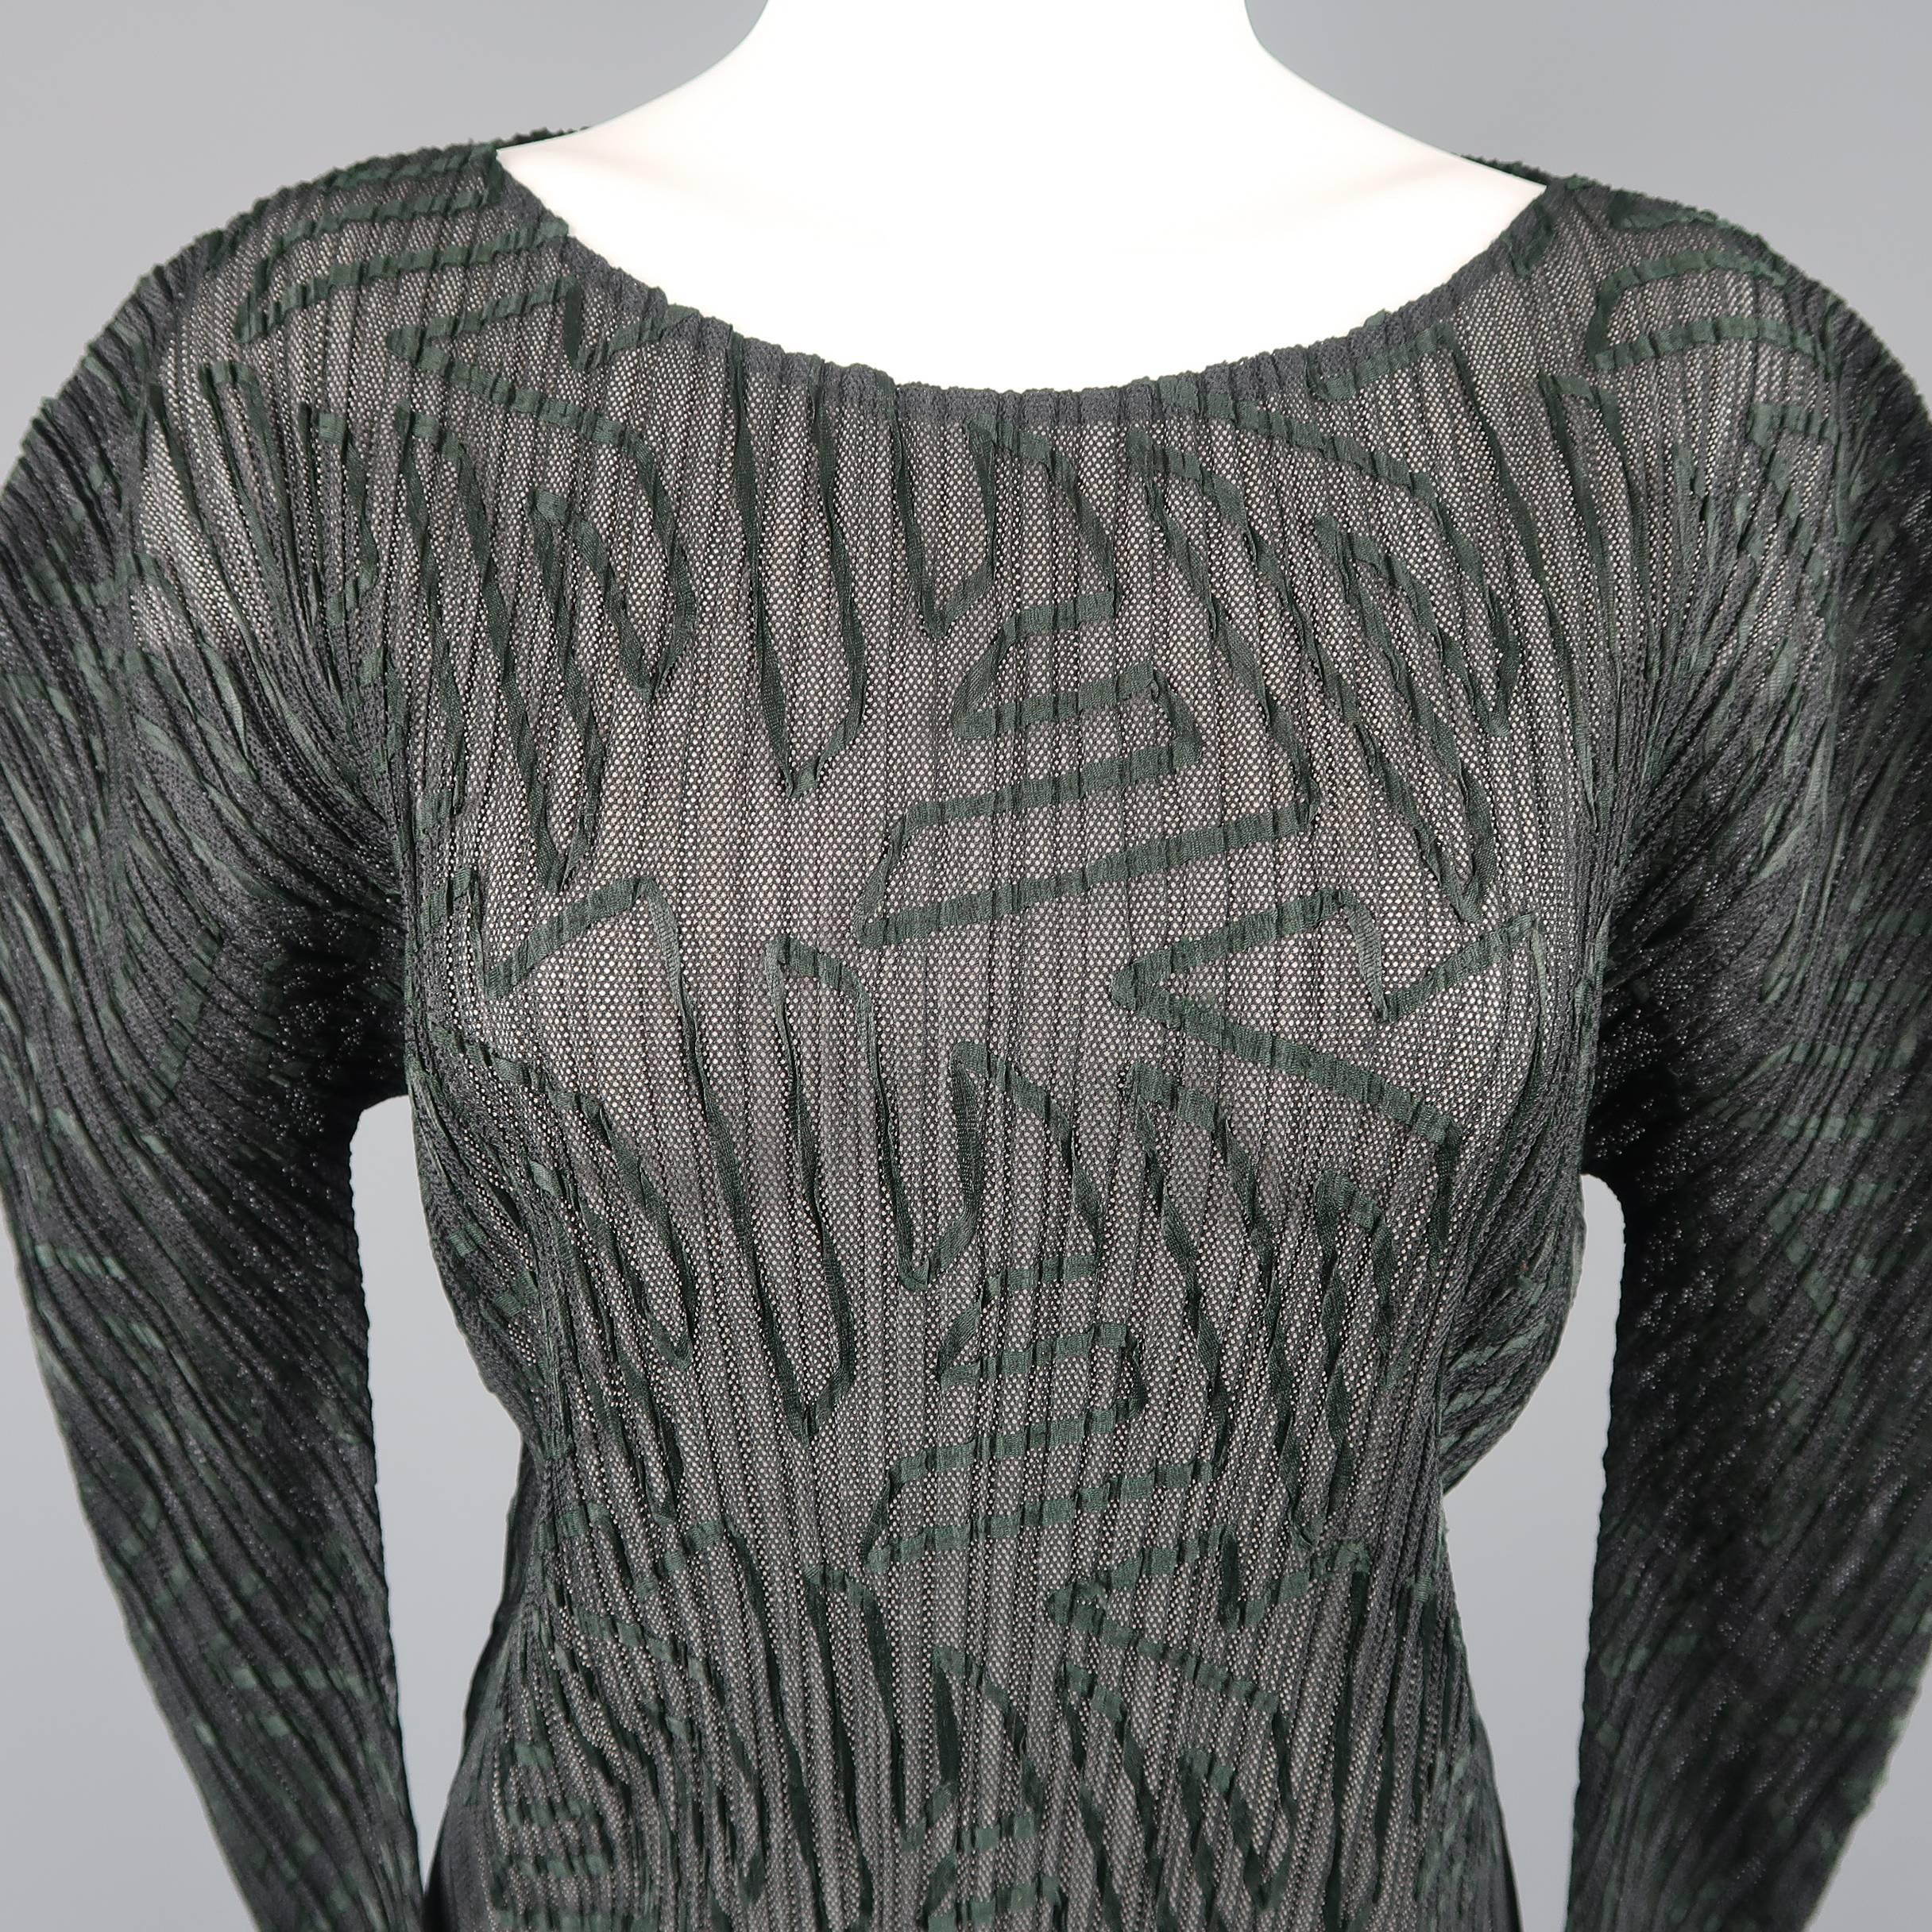 Issey Miyake  top comes in pleated black mesh with all over deep green ribbon pattern applique throughout, wide neck, and curved sleeves. Made in Japan.
 
Excellent Pre-Owned Condition.
Marked: M
 
Measurements:
 
Shoulder: 16 in.
Bust: 36